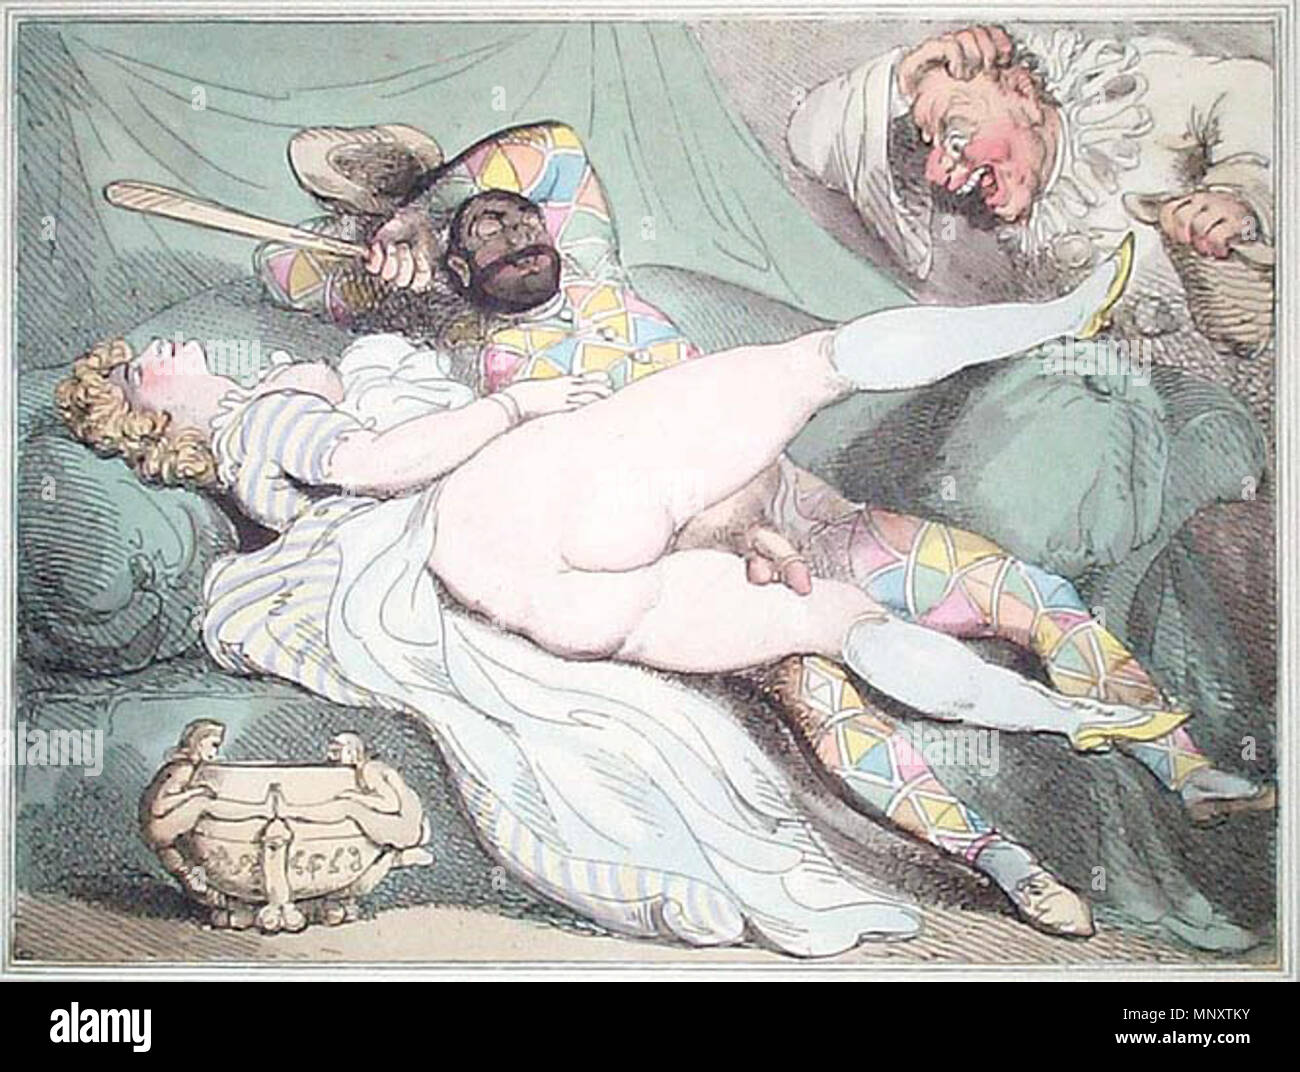 . A man discovers his wife in congress with a Harlequin. The clown prepares to hit him with a club. .   Thomas Rowlandson  (1756–1827)      Description English painter, draughtsman, etcher and illustrator  Date of birth/death 14 July 1756 22 April 1827  Location of birth/death London London  Work location London, Paris (1774), France, Germany, Italy, Rotterdam (ca. 1794), Amsterdam (ca. 1794), Netherlands (ca. 1794)  Authority control  : Q318584 VIAF: 56672964 ISNI: 0000 0001 2134 1830 ULAN: 500006930 LCCN: n50022330 NLA: 35465846 WorldCat 1189 Thomas Rowlandson (34) Stock Photo